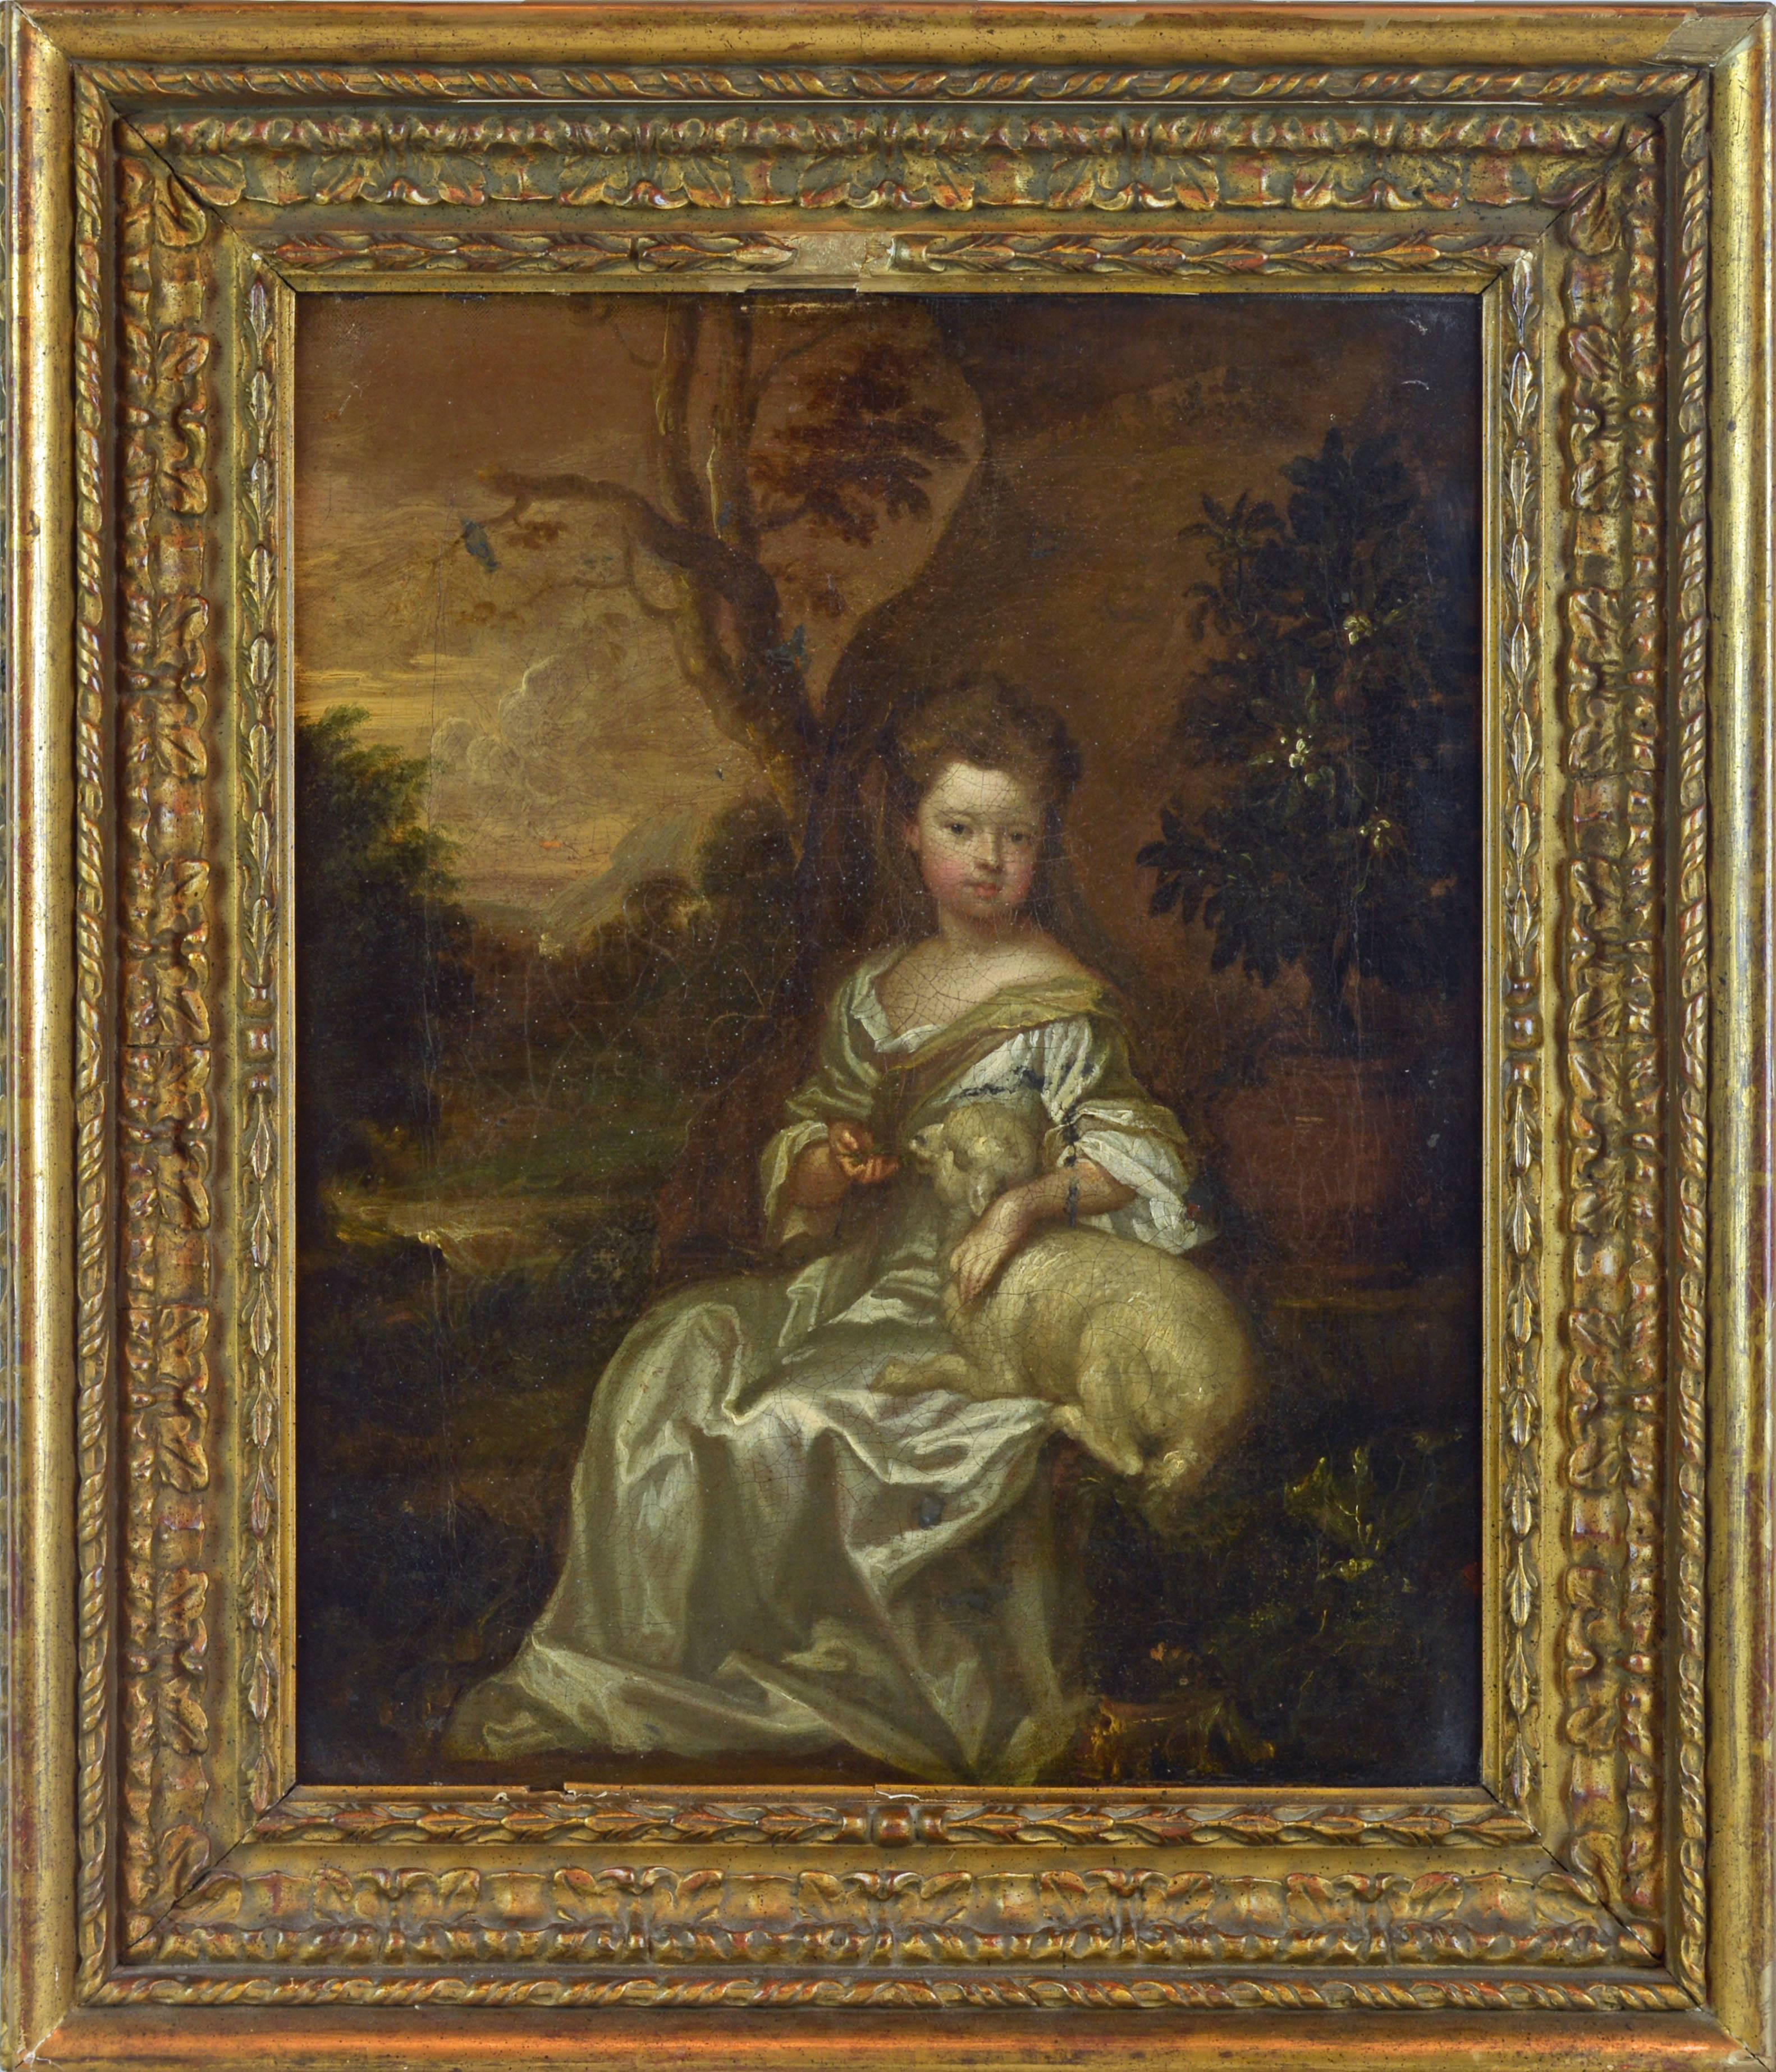 This charming Old Master painting features a young girl, of noble or royal descendance, wearing a silk garment and sash, seated in a romantic landscape offering treats to a little lamb resting in her lap, in the background a blooming tree and a